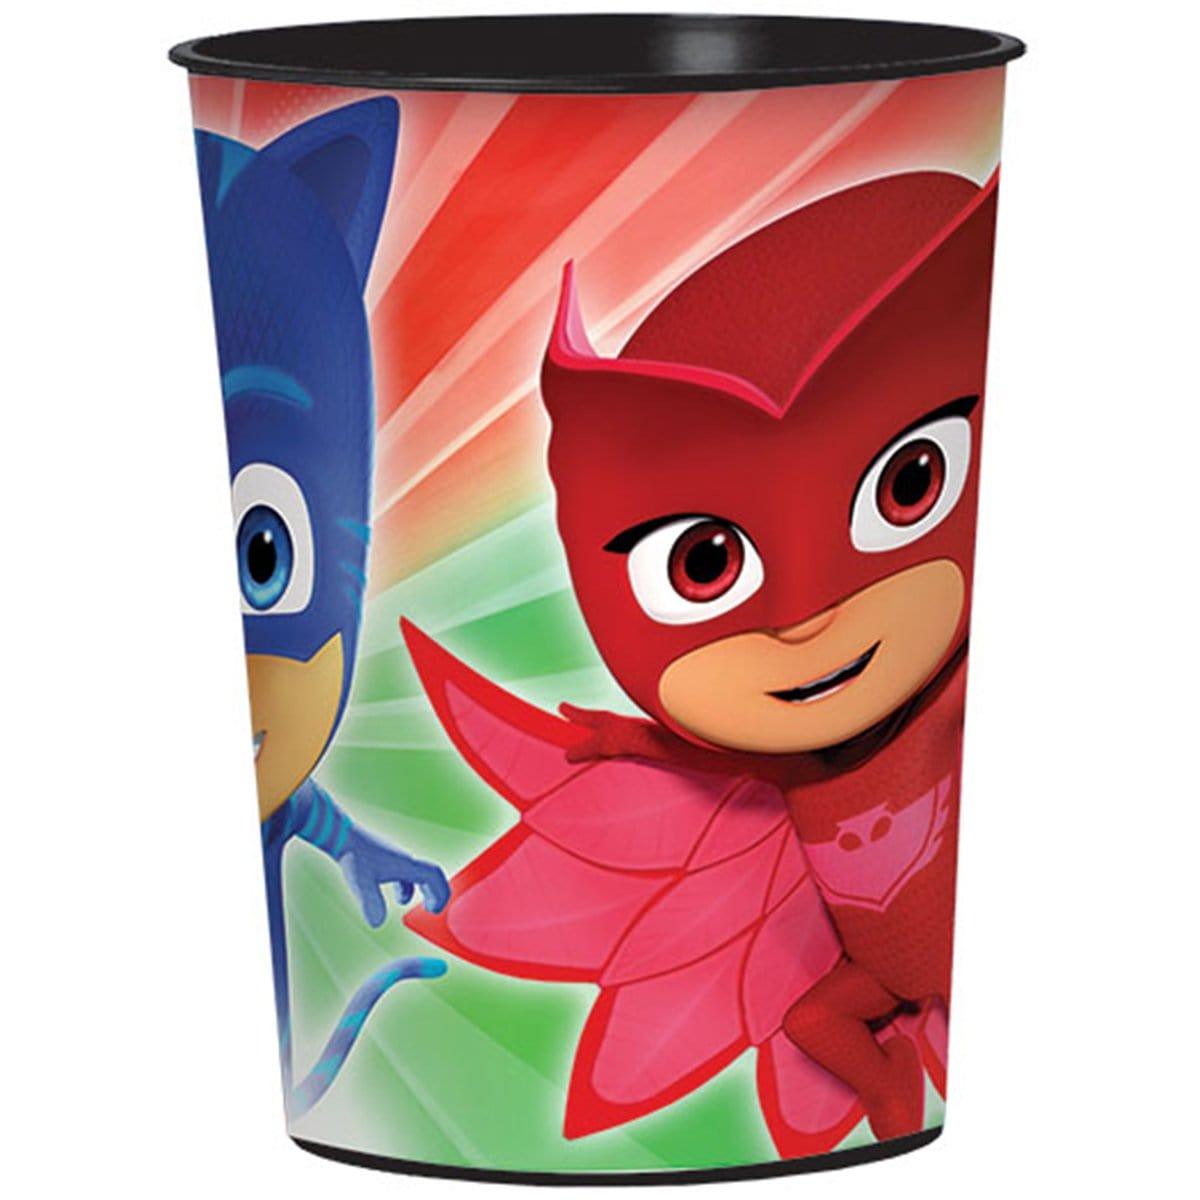 Buy Kids Birthday PJ Masks plastic favor cup sold at Party Expert